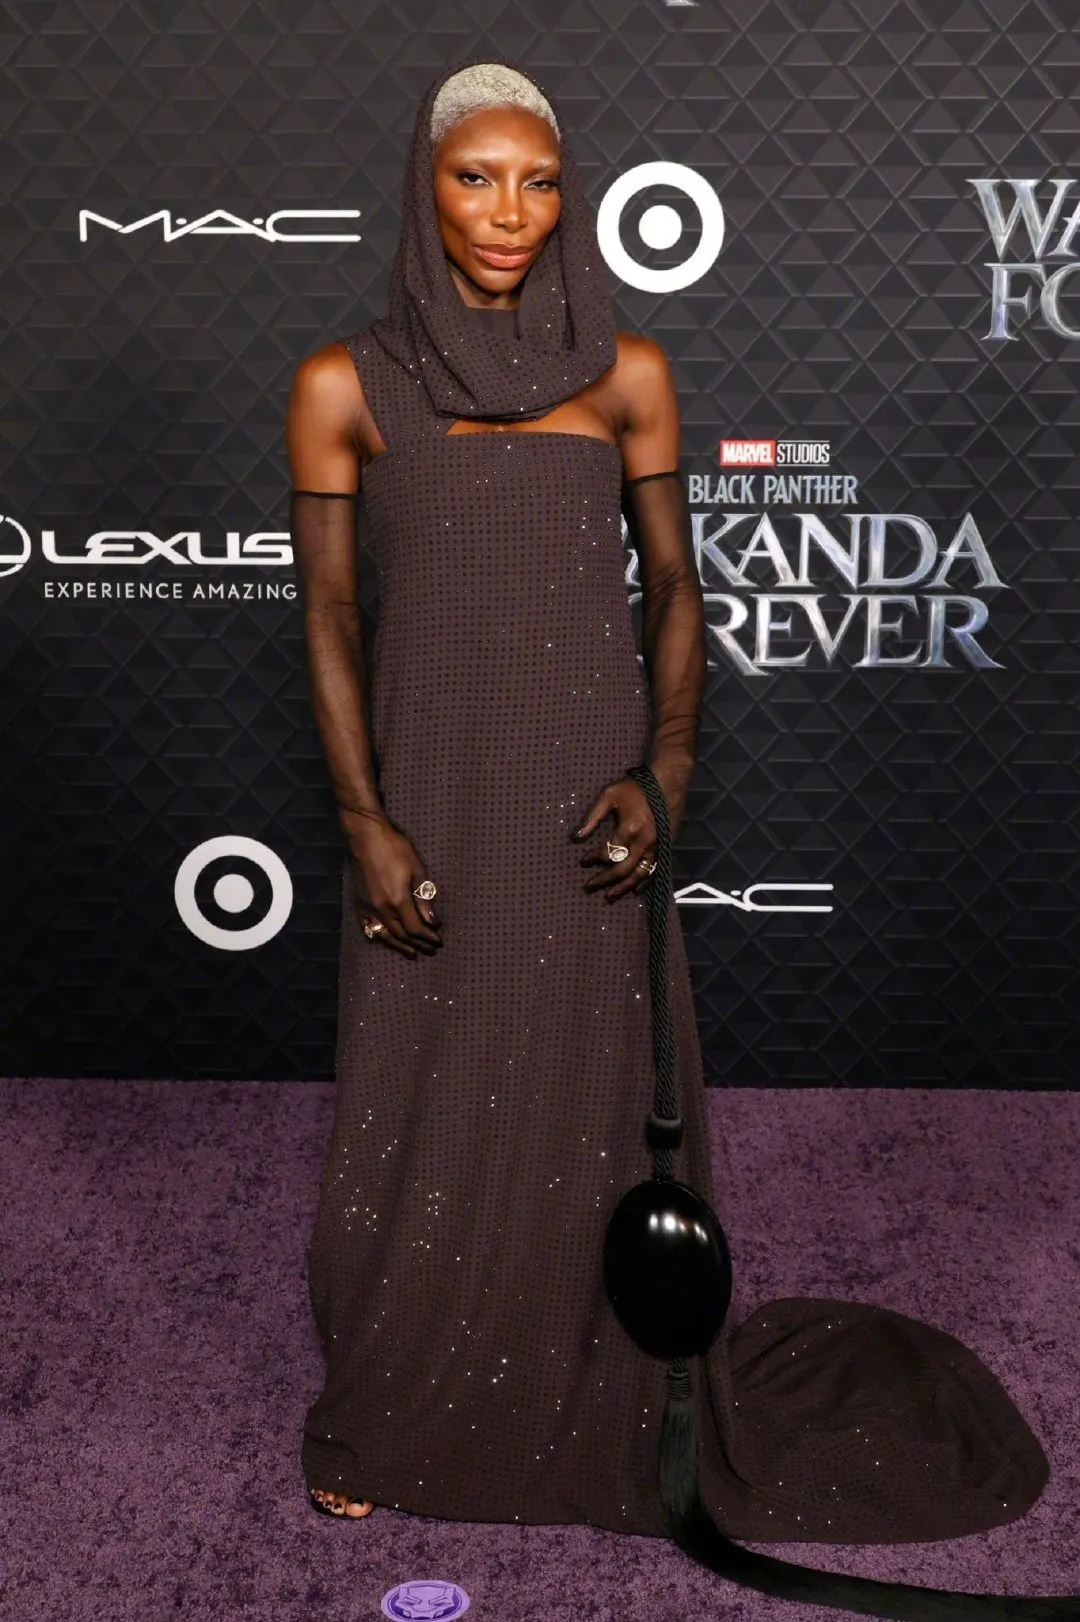 'Aneka' Michaela Coel attends premiere of 'Black Panther: Wakanda Forever' | FMV6